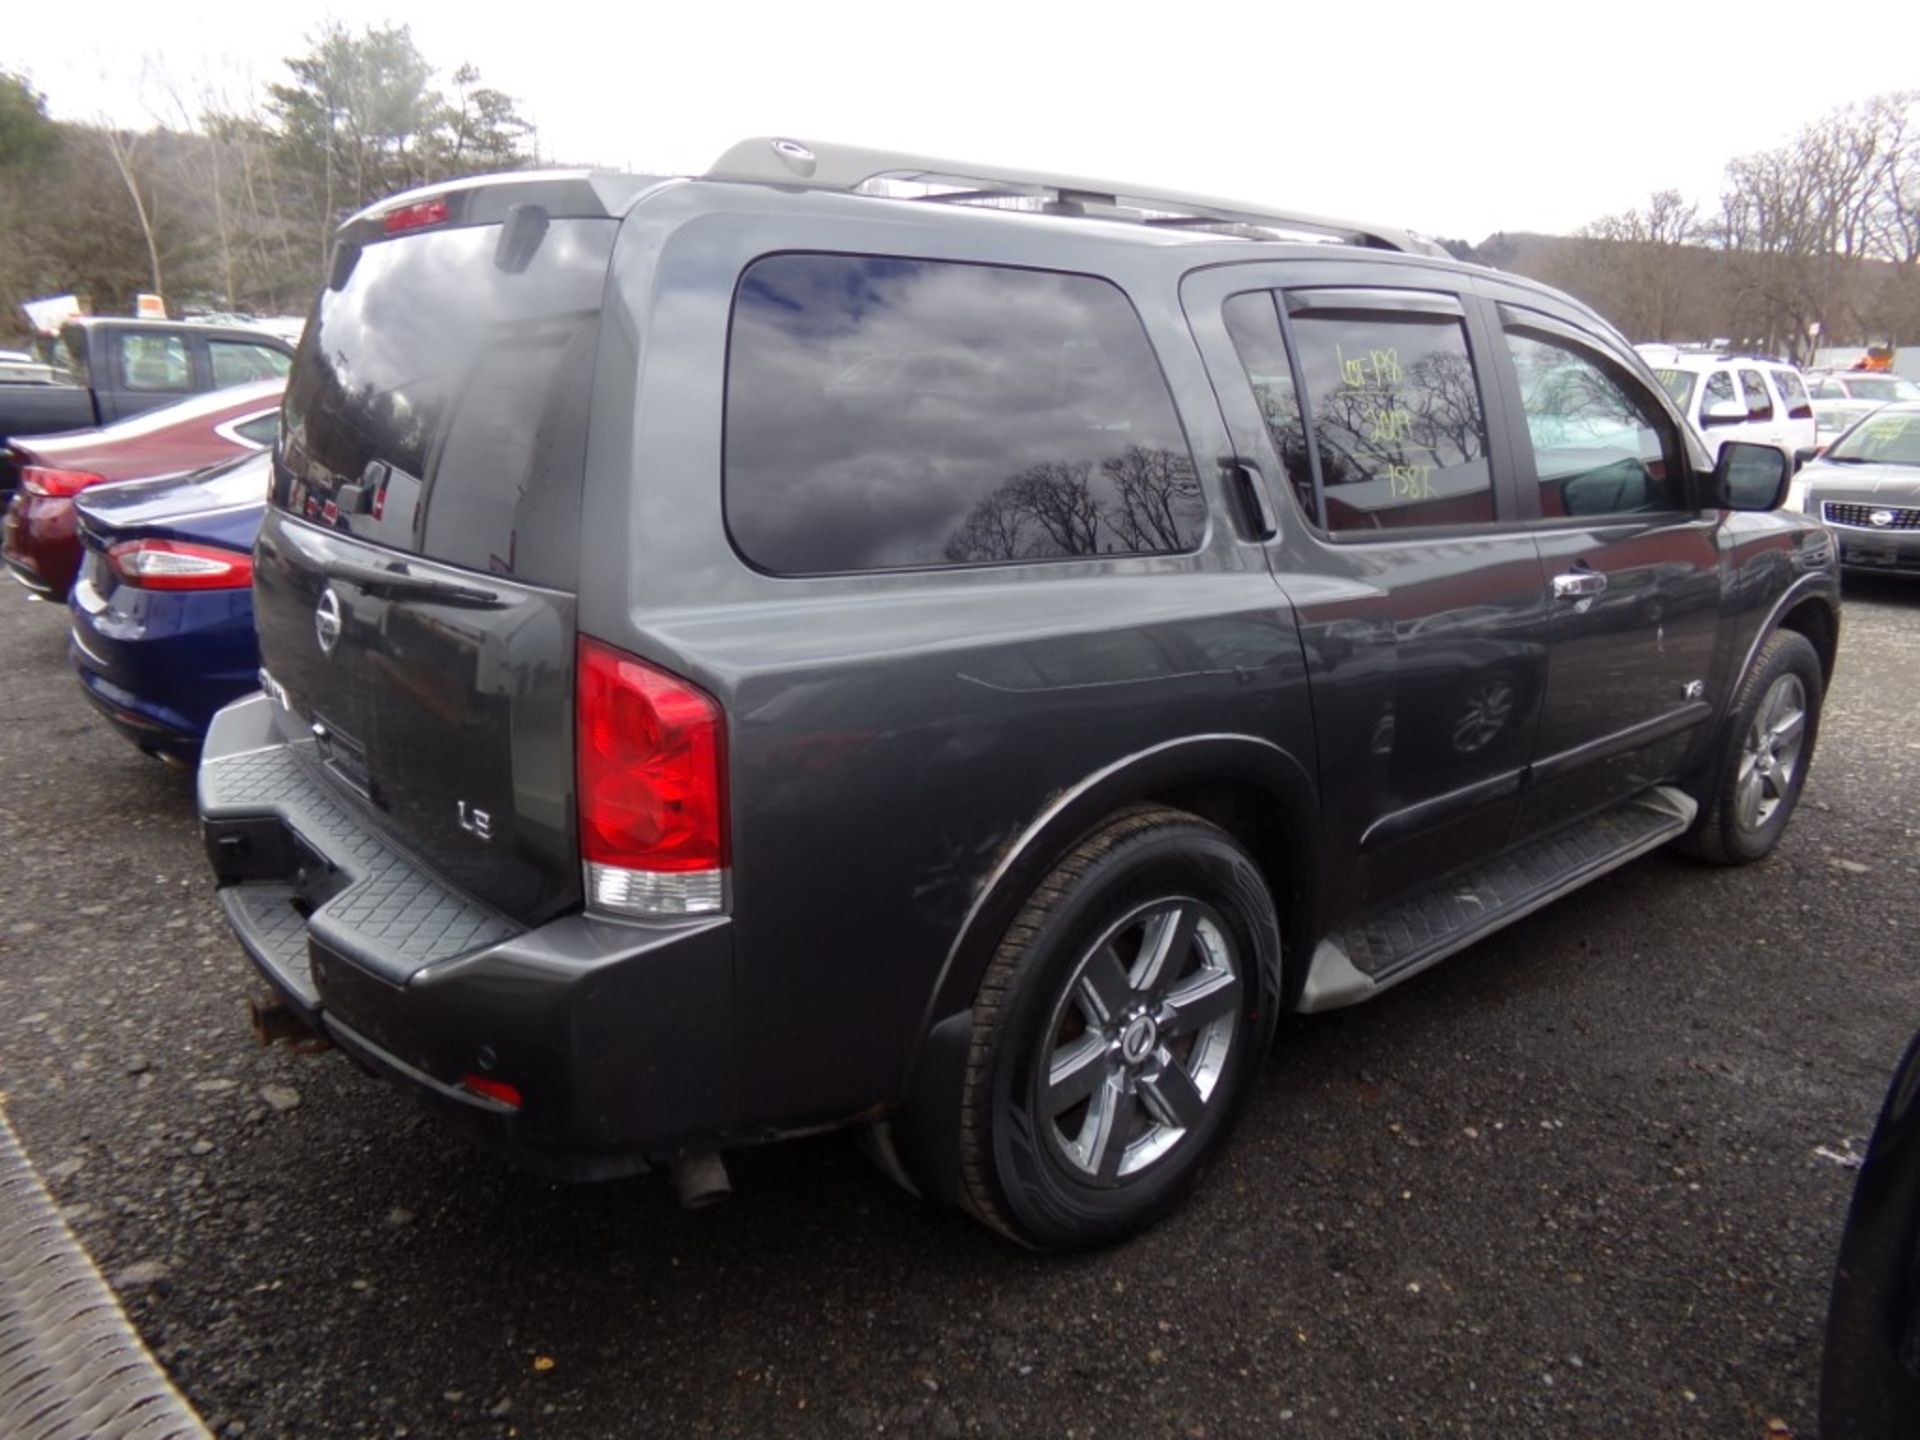 2009 Nissan Armada LE 4X4, Leather, Sunroof, 3rd Row Seating, Grey, 158,581 Miles, VIN# - Image 6 of 13